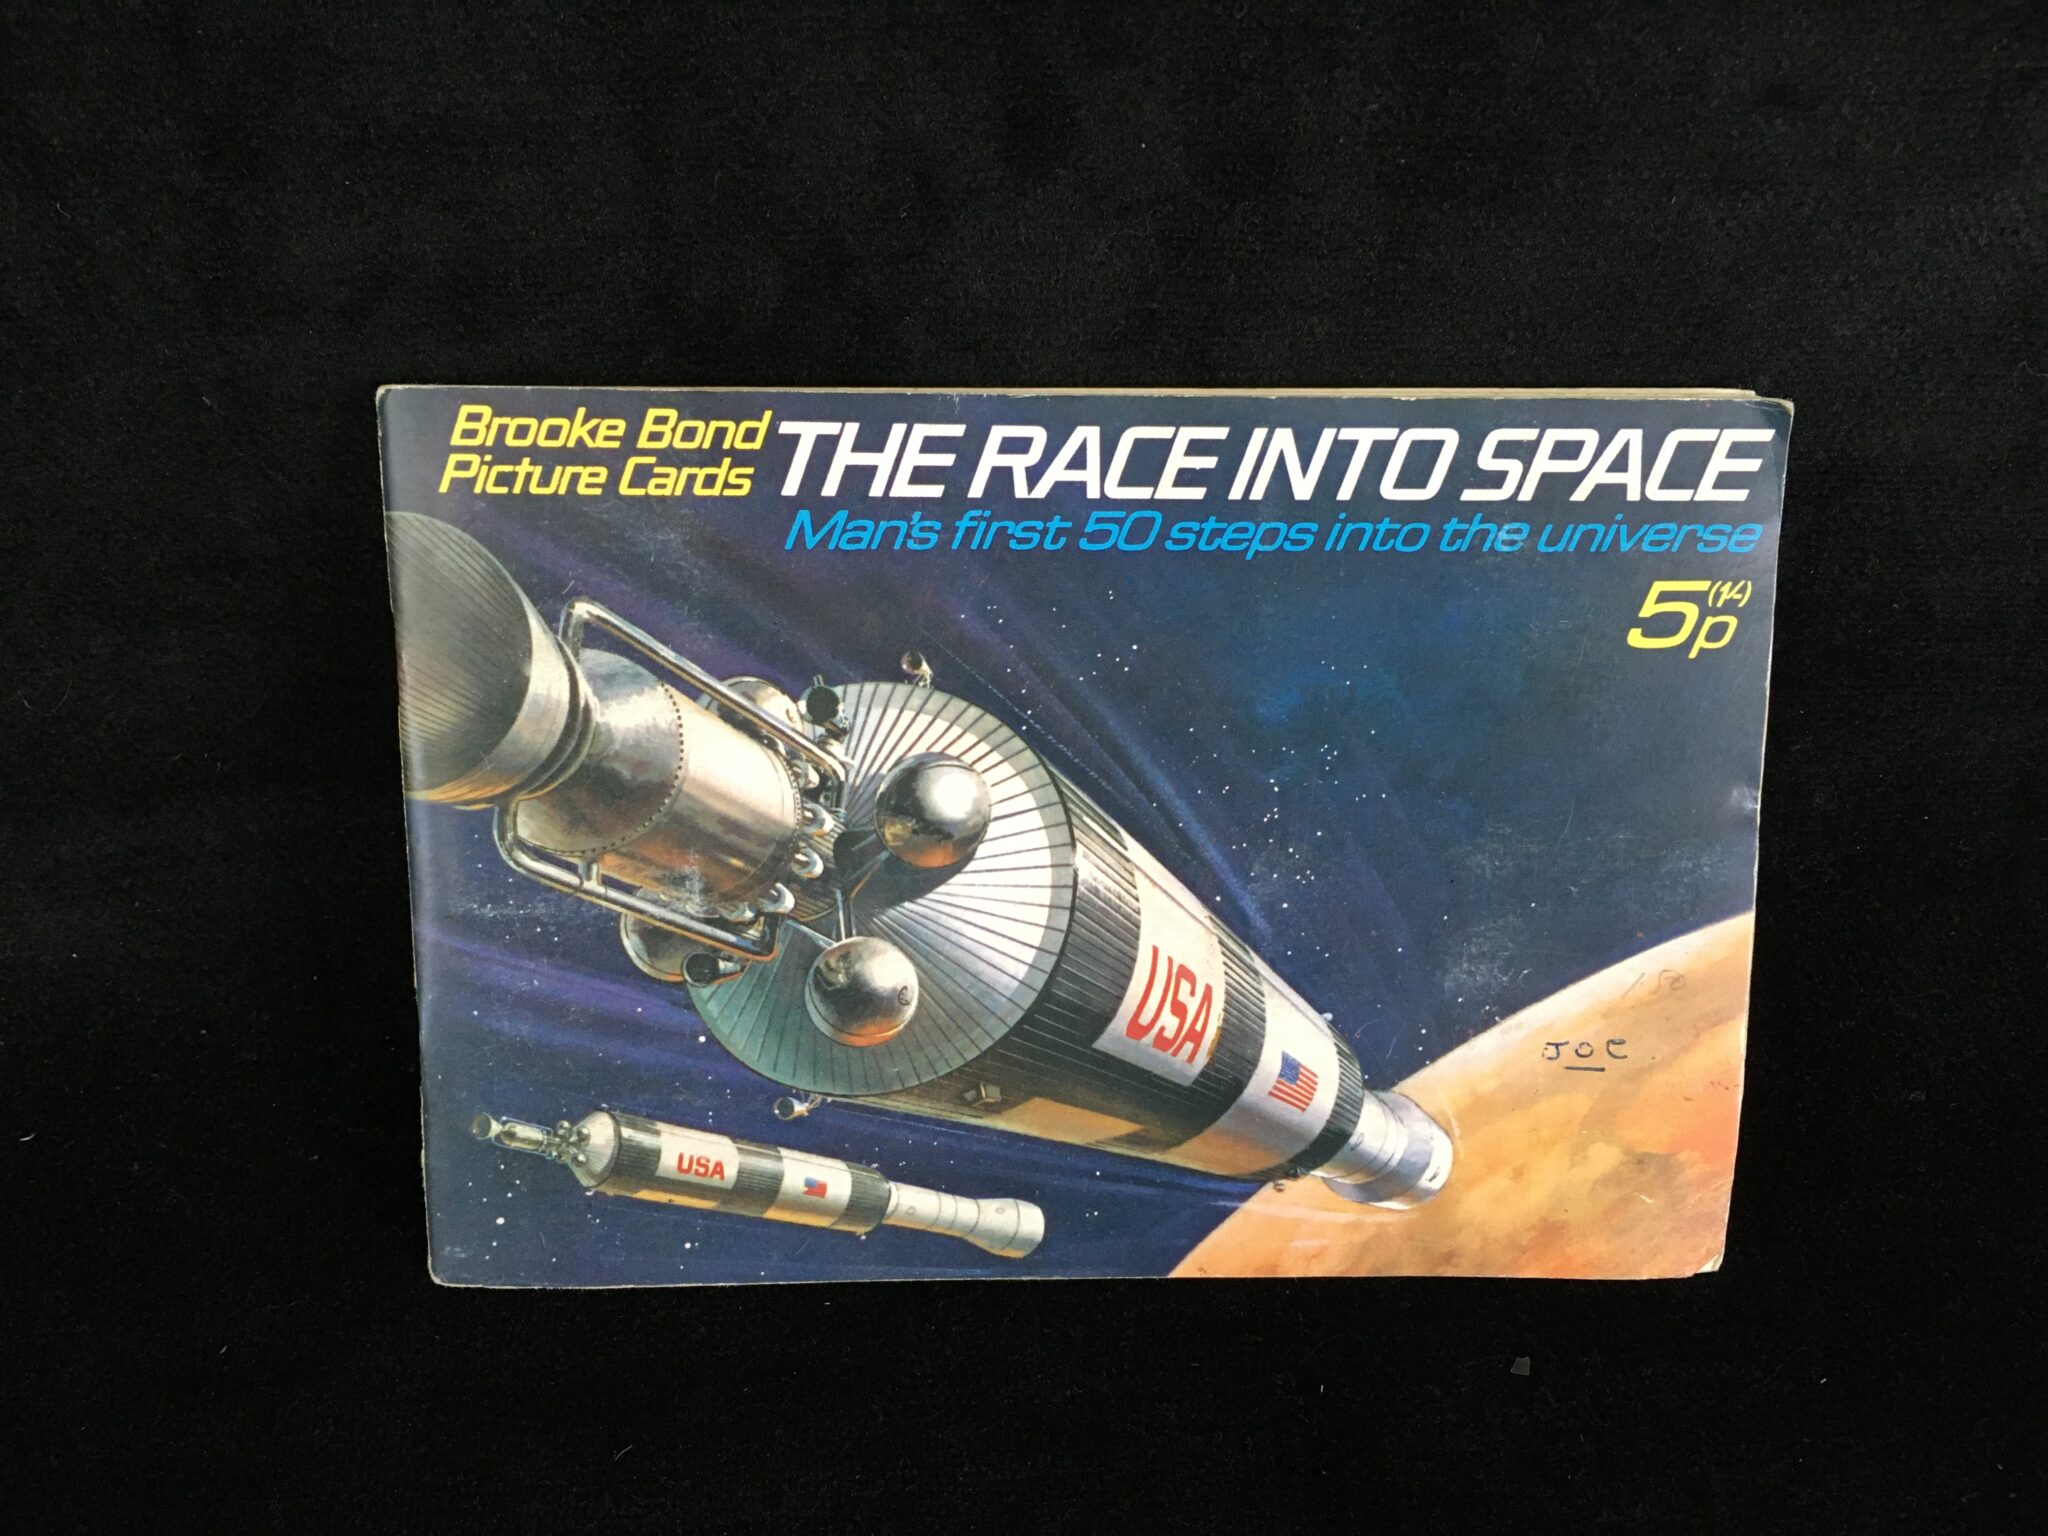 more like race into space